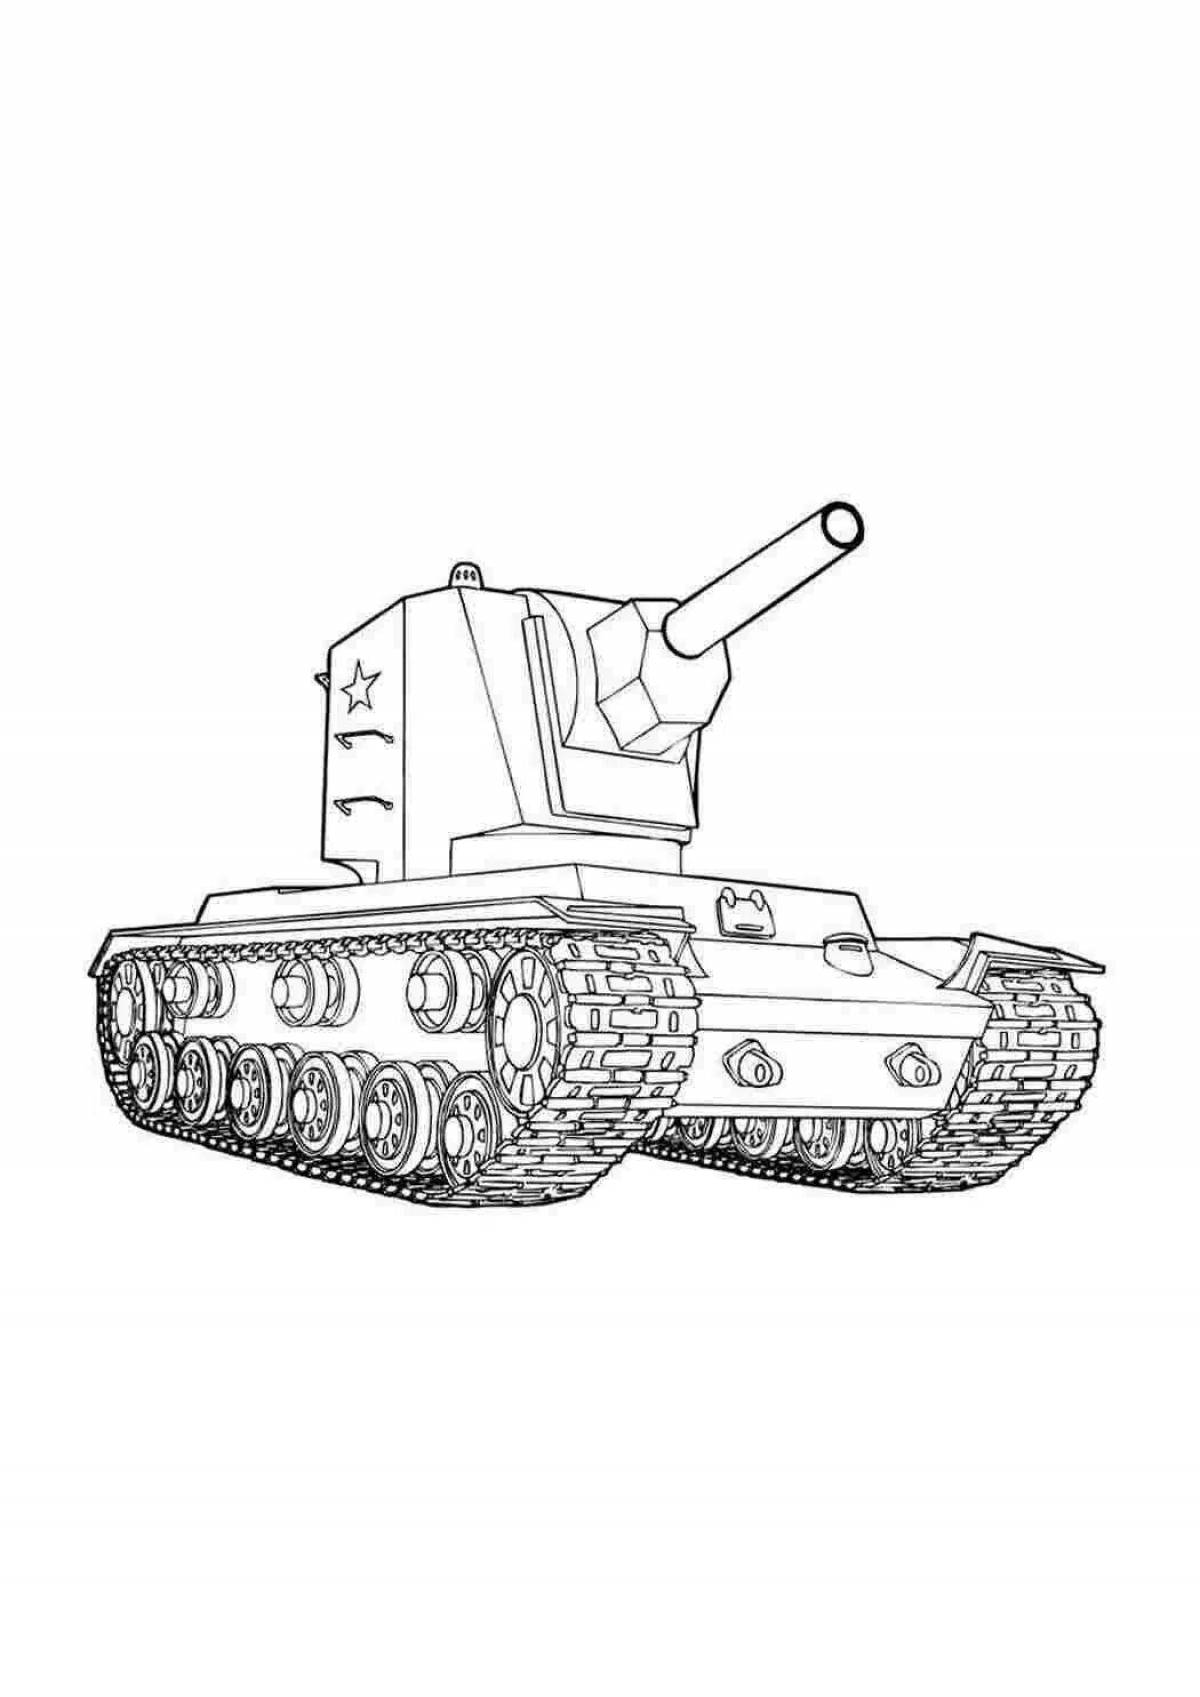 Great lego tank coloring page